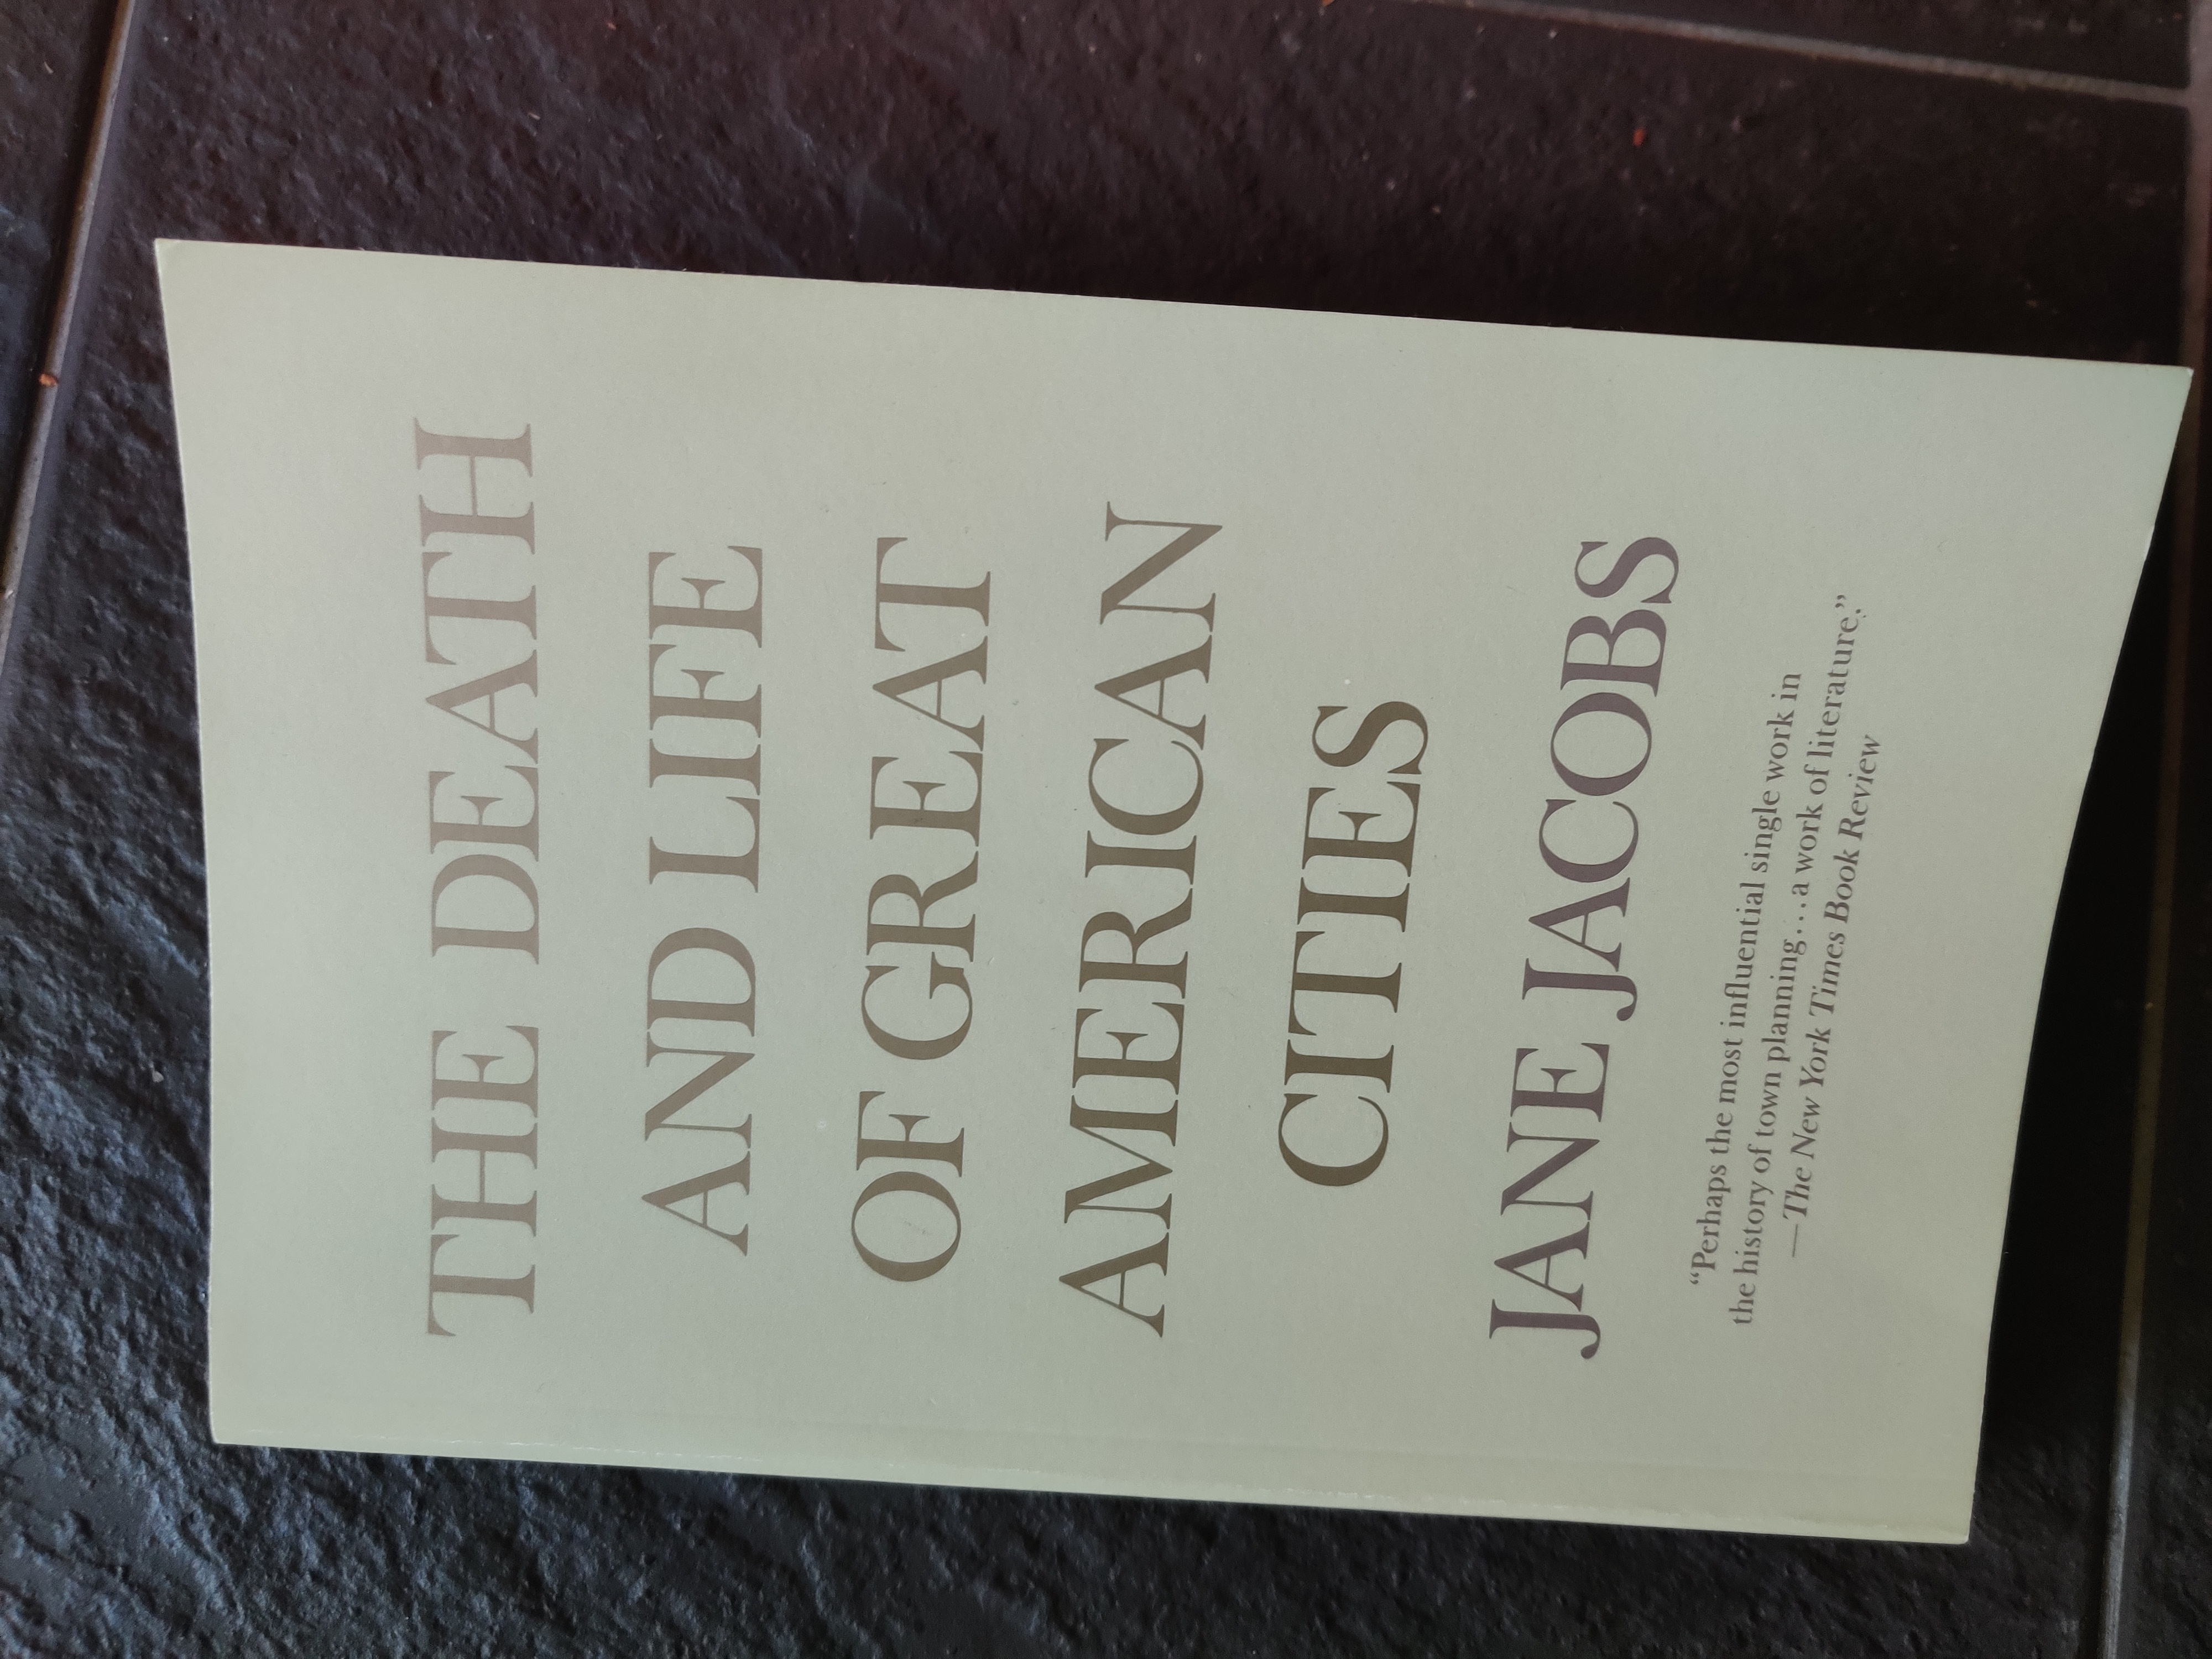 “The Death and Life of Great American Cities” cover